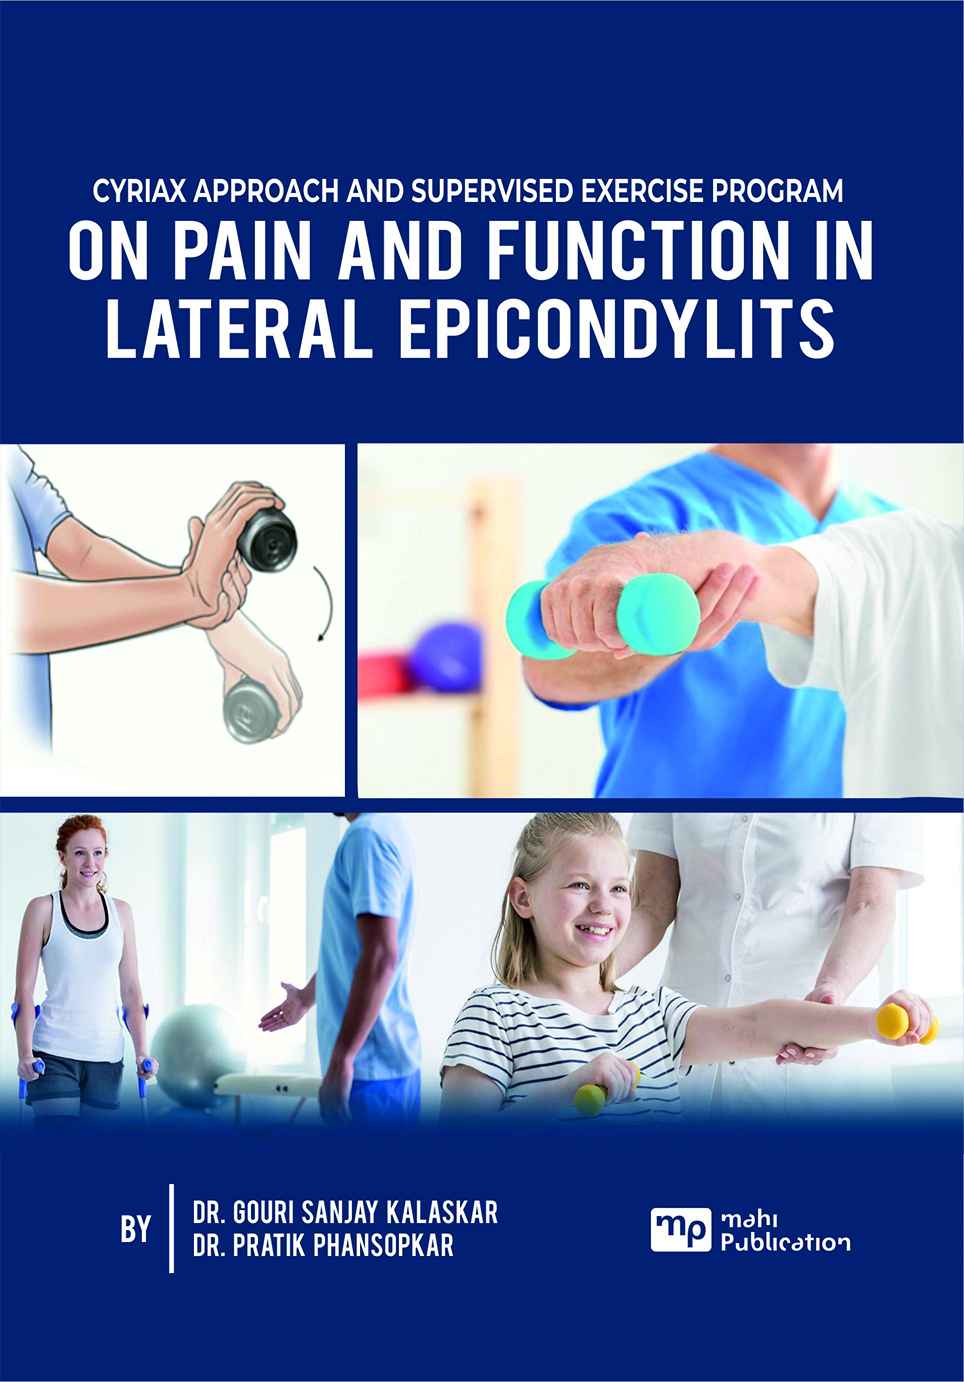 Cyriax Approach and Supervised Exercise Program on Pain and Function in Lateral Epicondylits